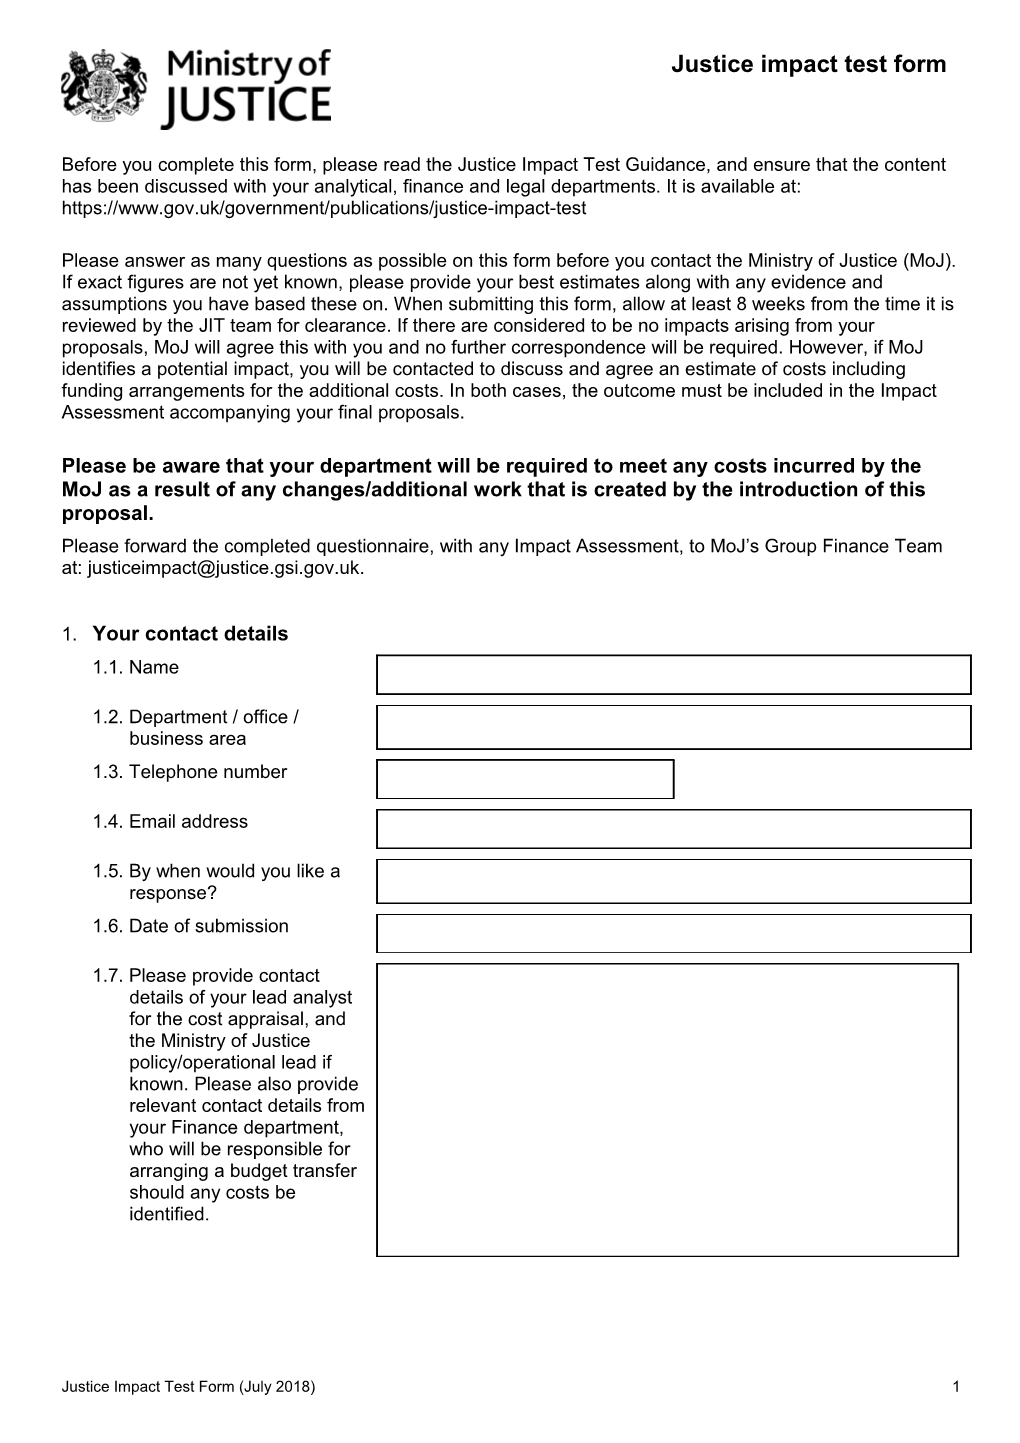 Justice Impact Test Form